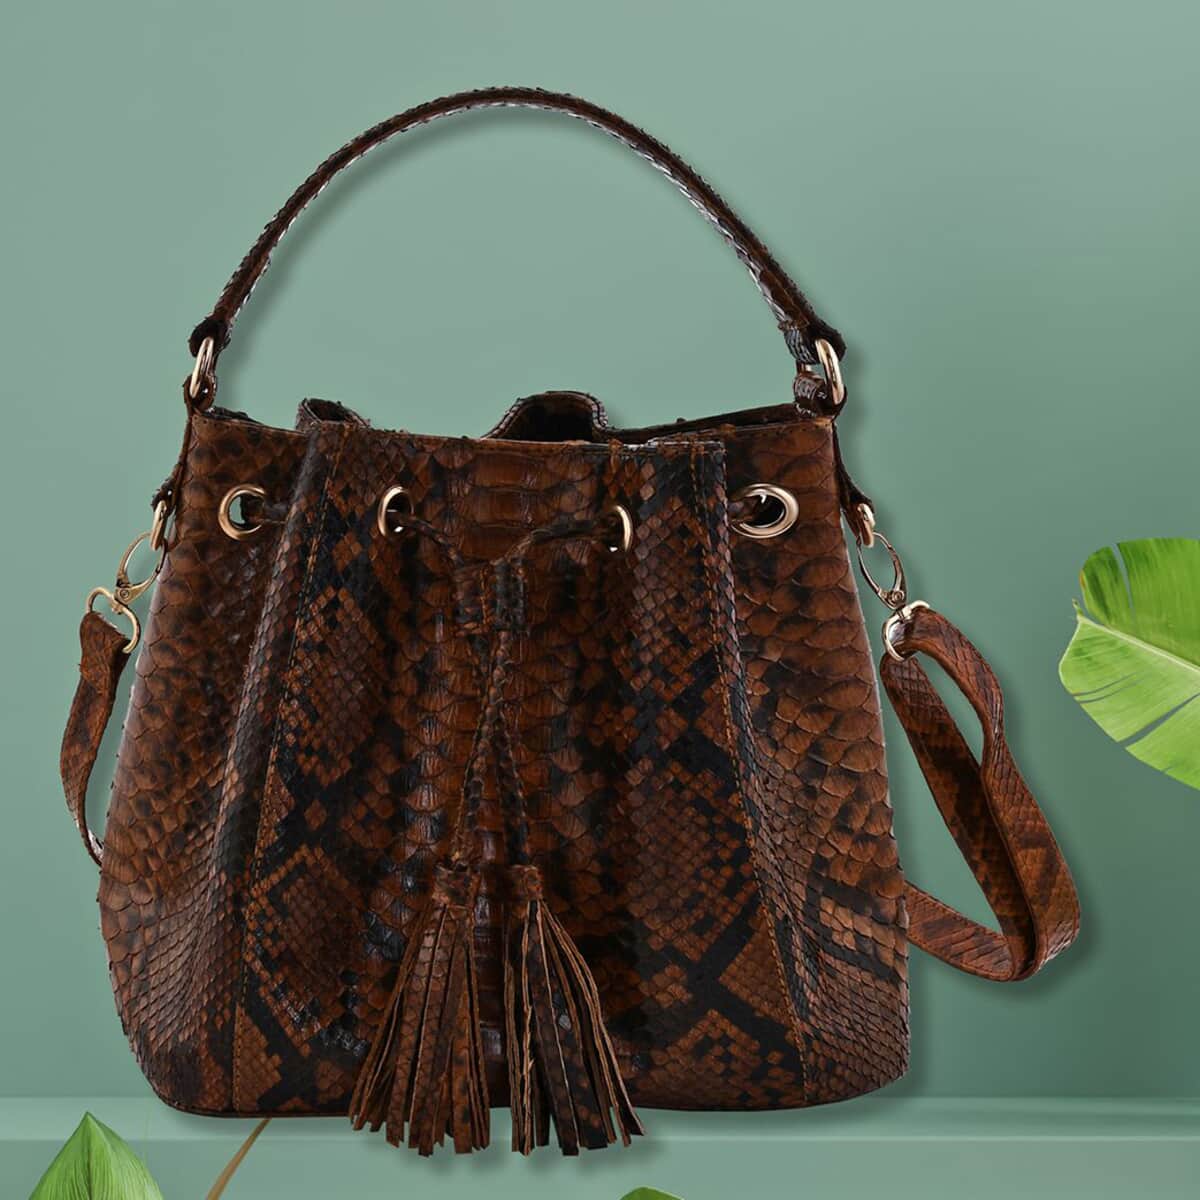 Doorbuster The Grand Pelle Handcrafted Brown Color Genuine Python Leather Tote Bag (15"x4.75"x10") image number 1